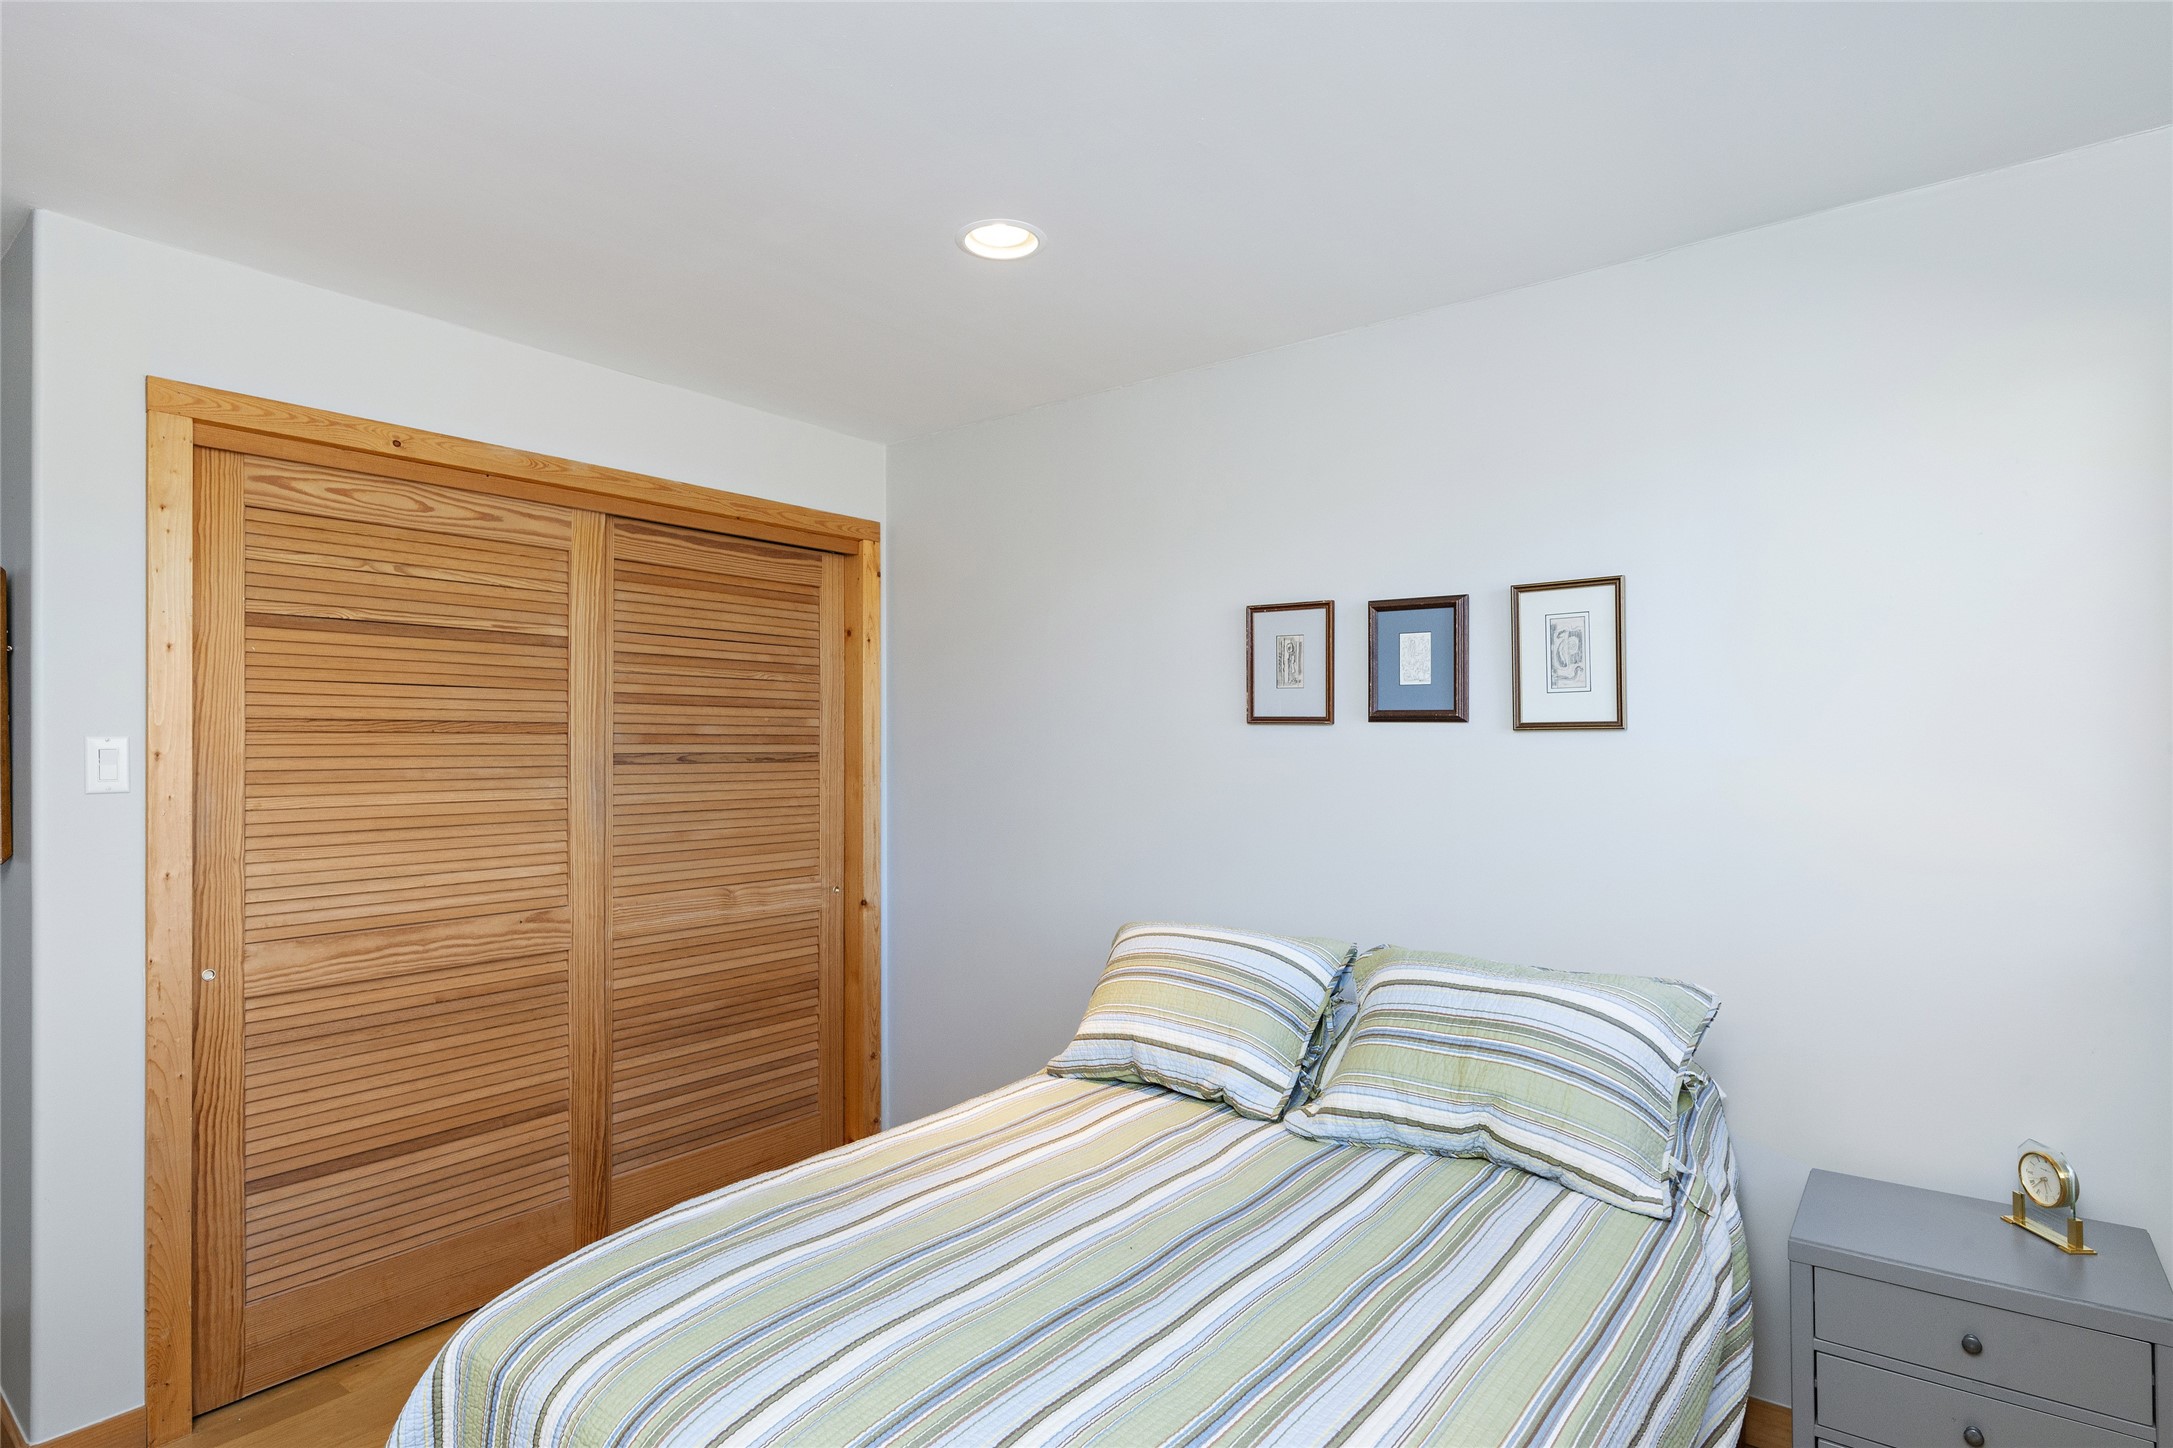 Light and bright second bedroom with hard wood flooring